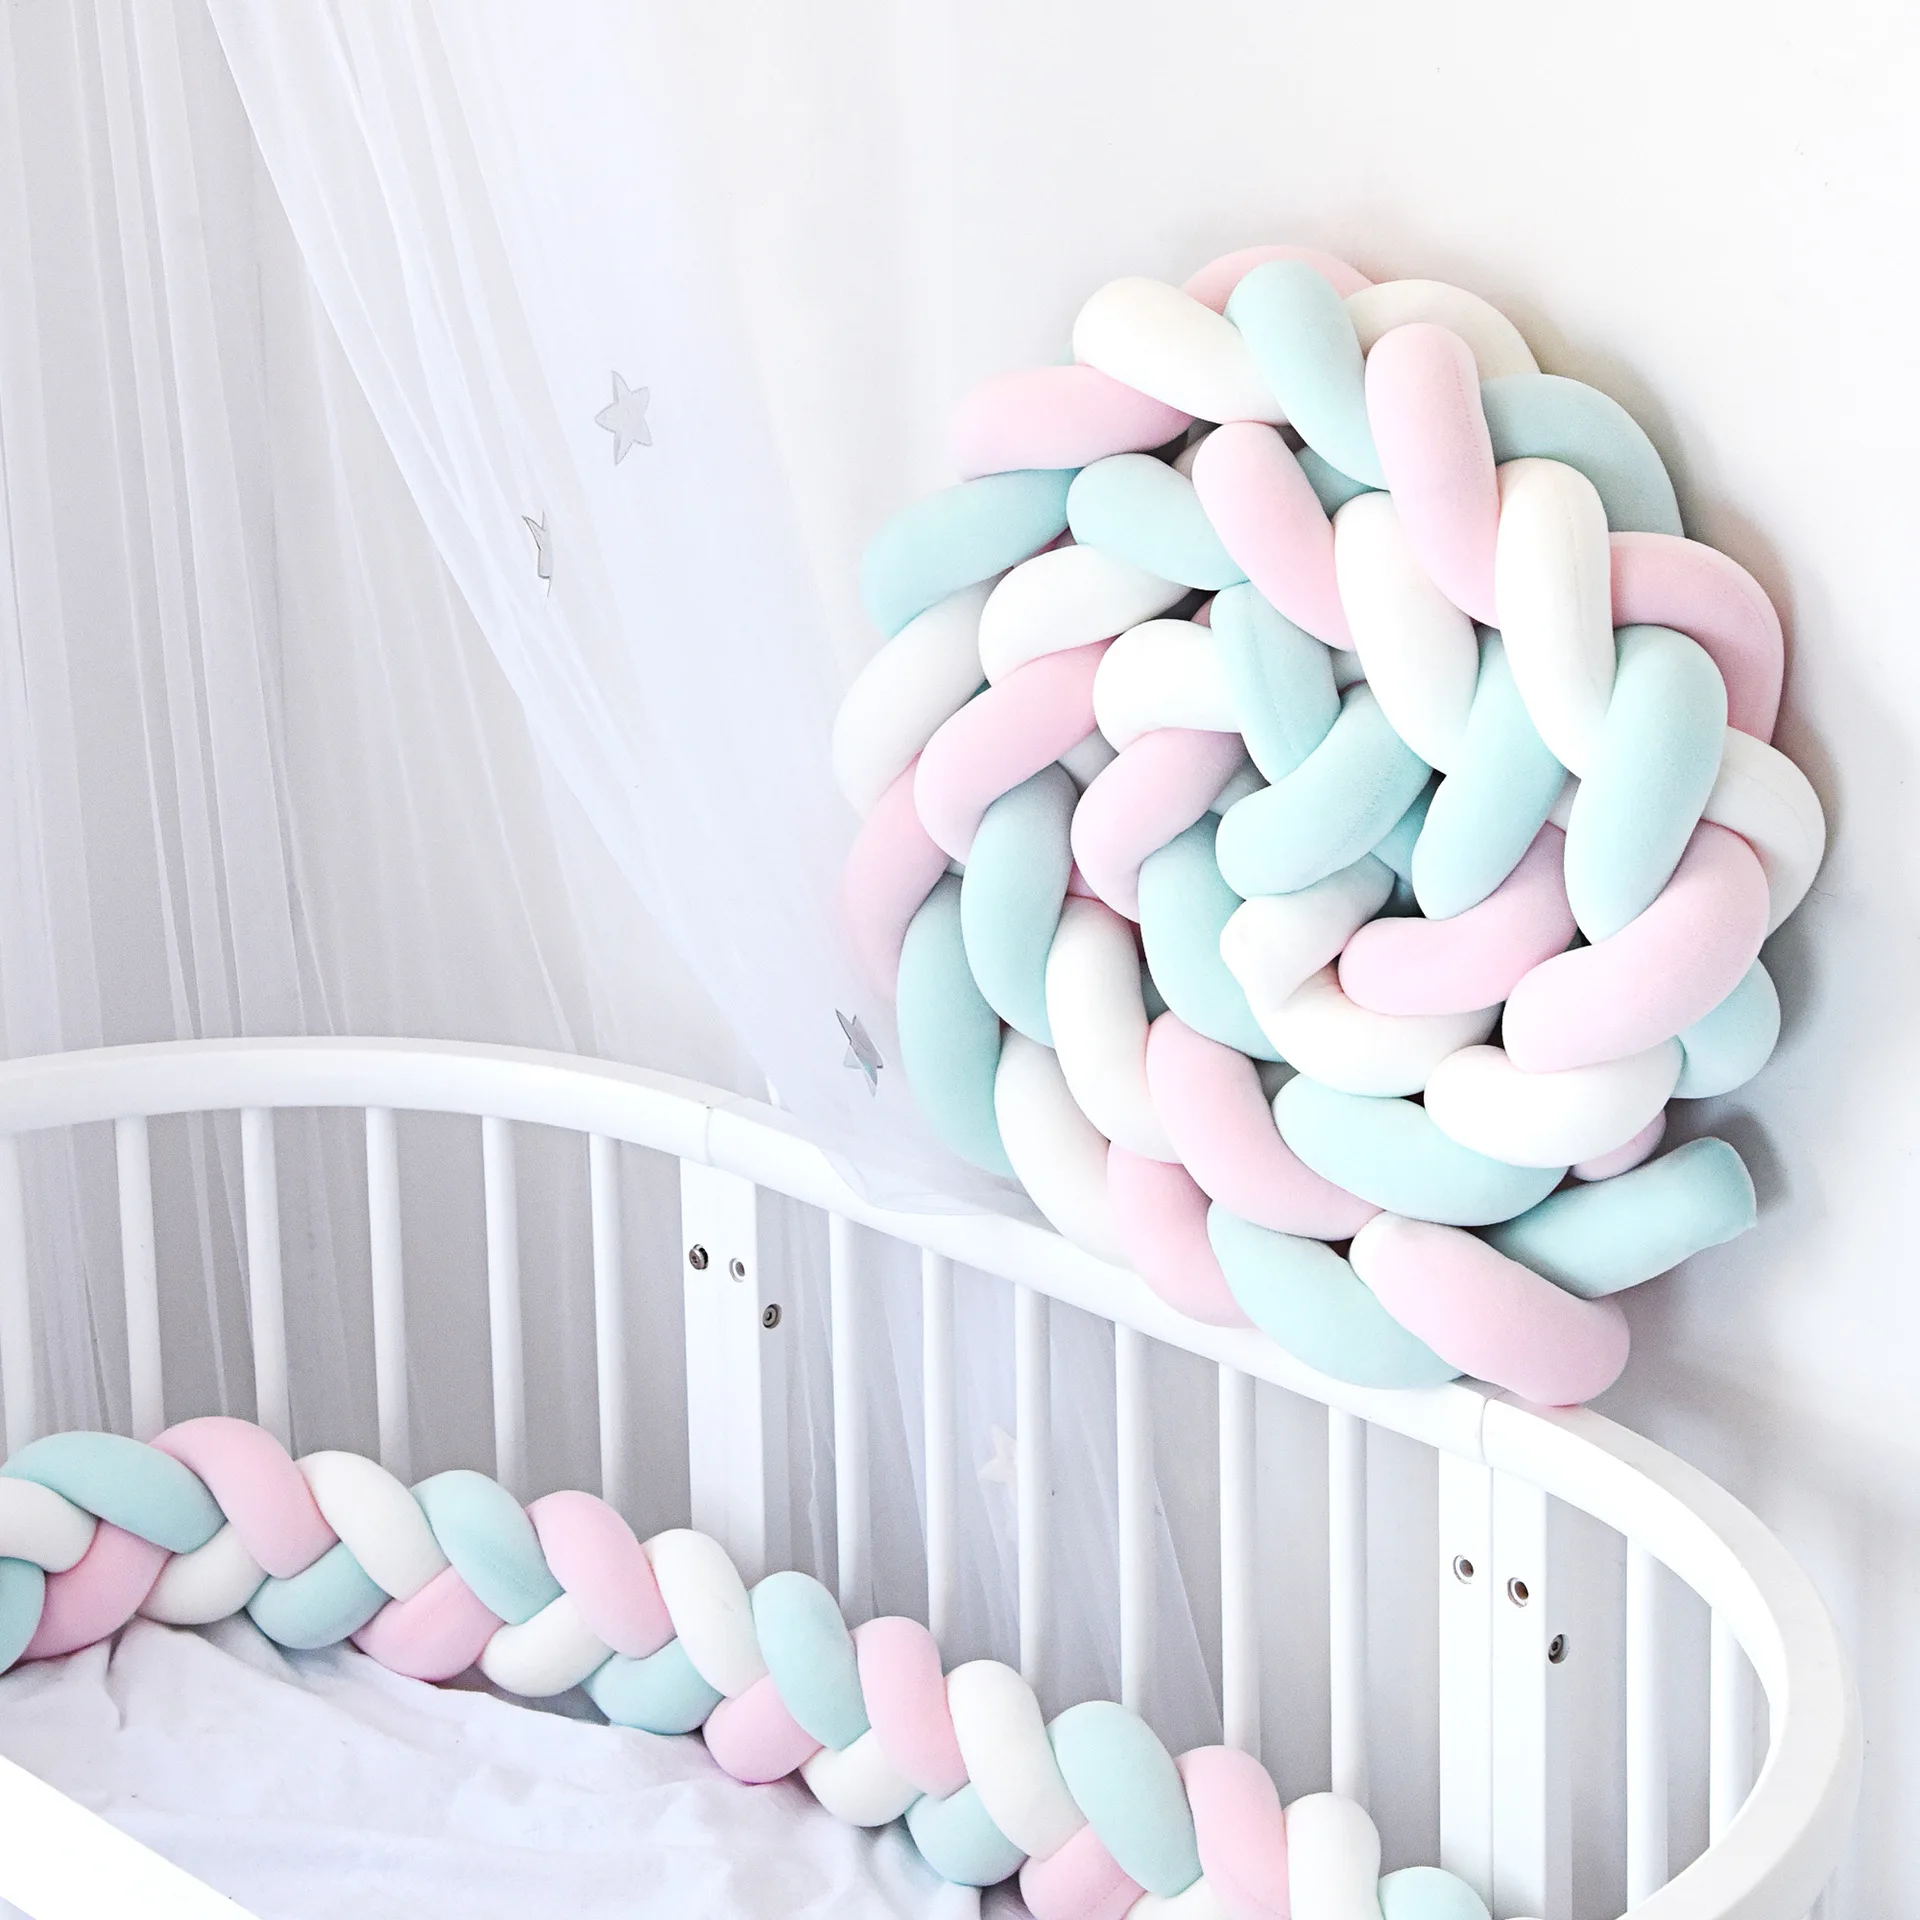 2M/3M/3.5M Length Newborn Baby Bed Bumper Knotted Braid Pillow Baby Bed Fence Protector Crib Bumper Baby Room Decor ZT26